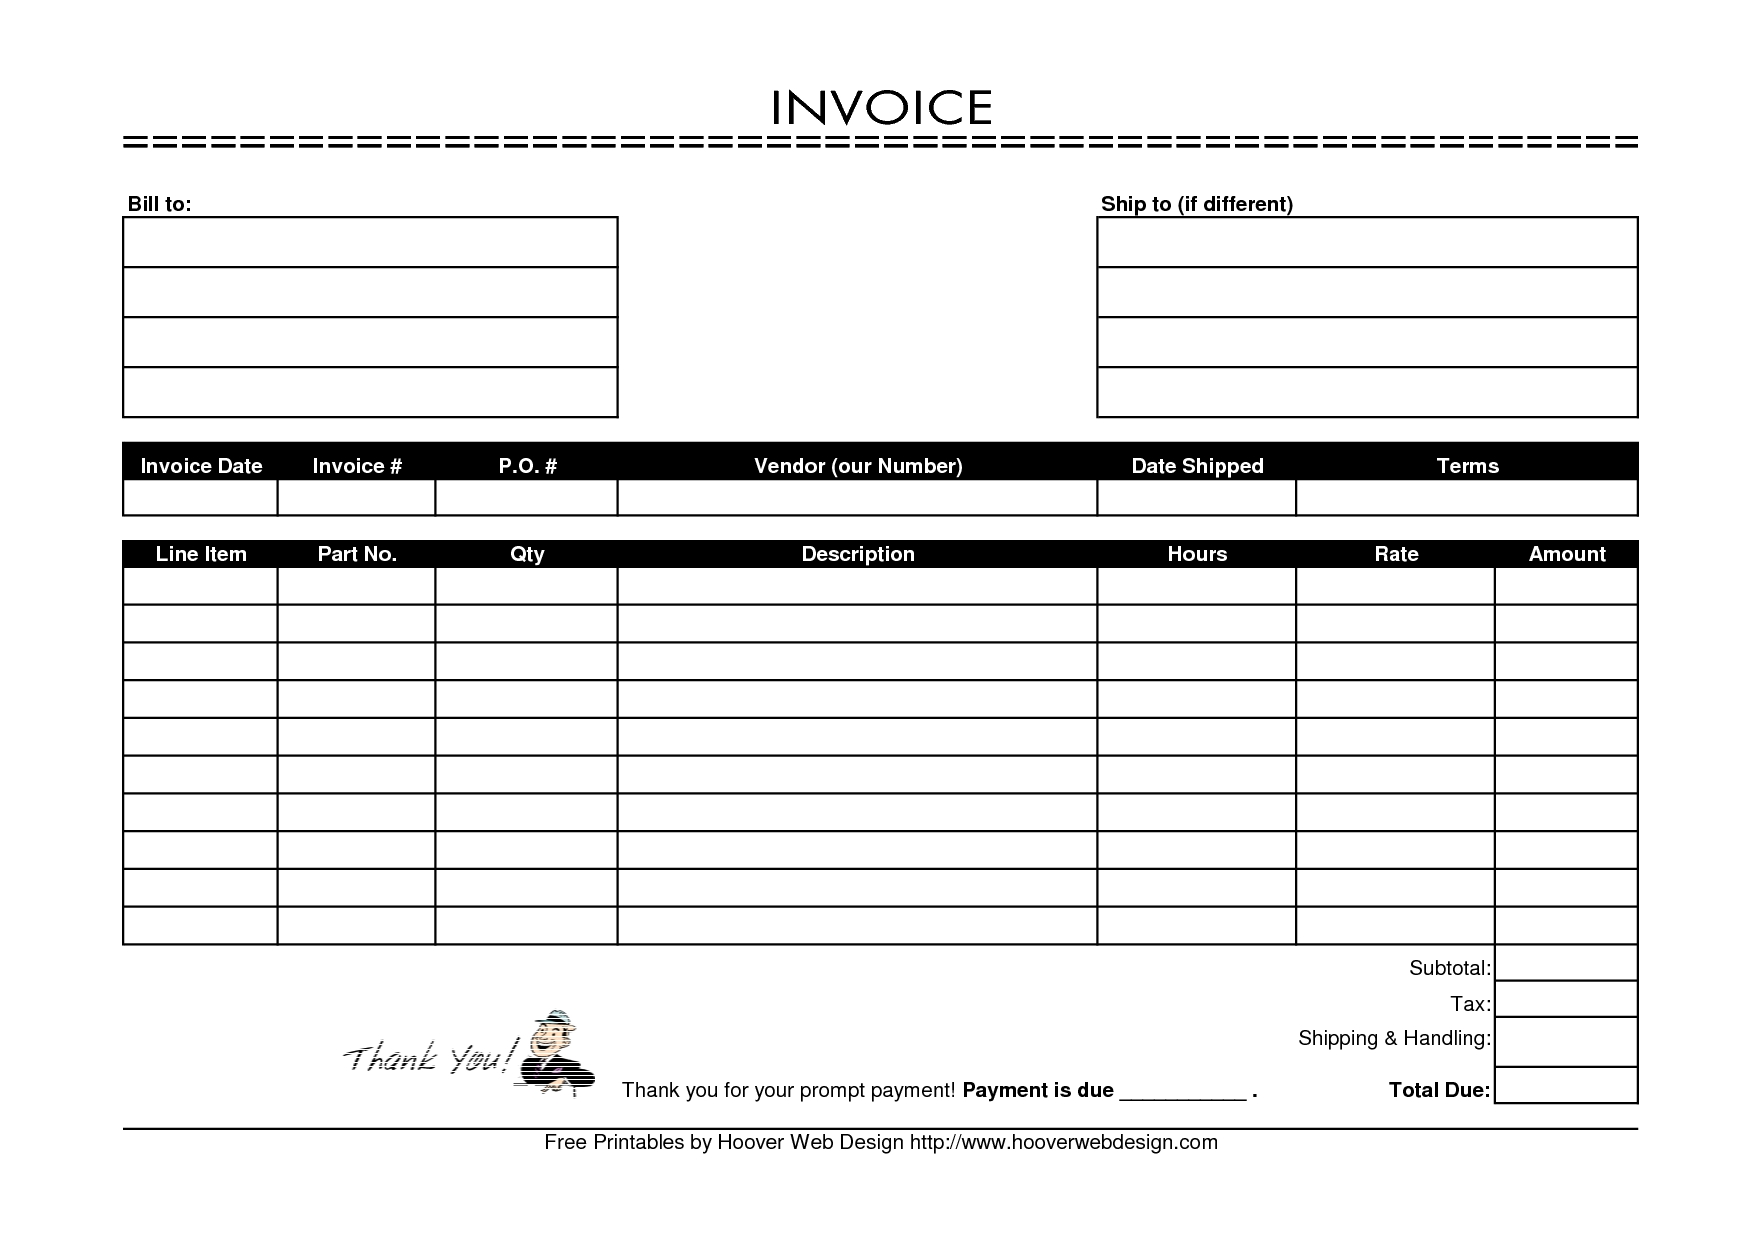 9 examples of printable invoice template and steps to create generic invoice form